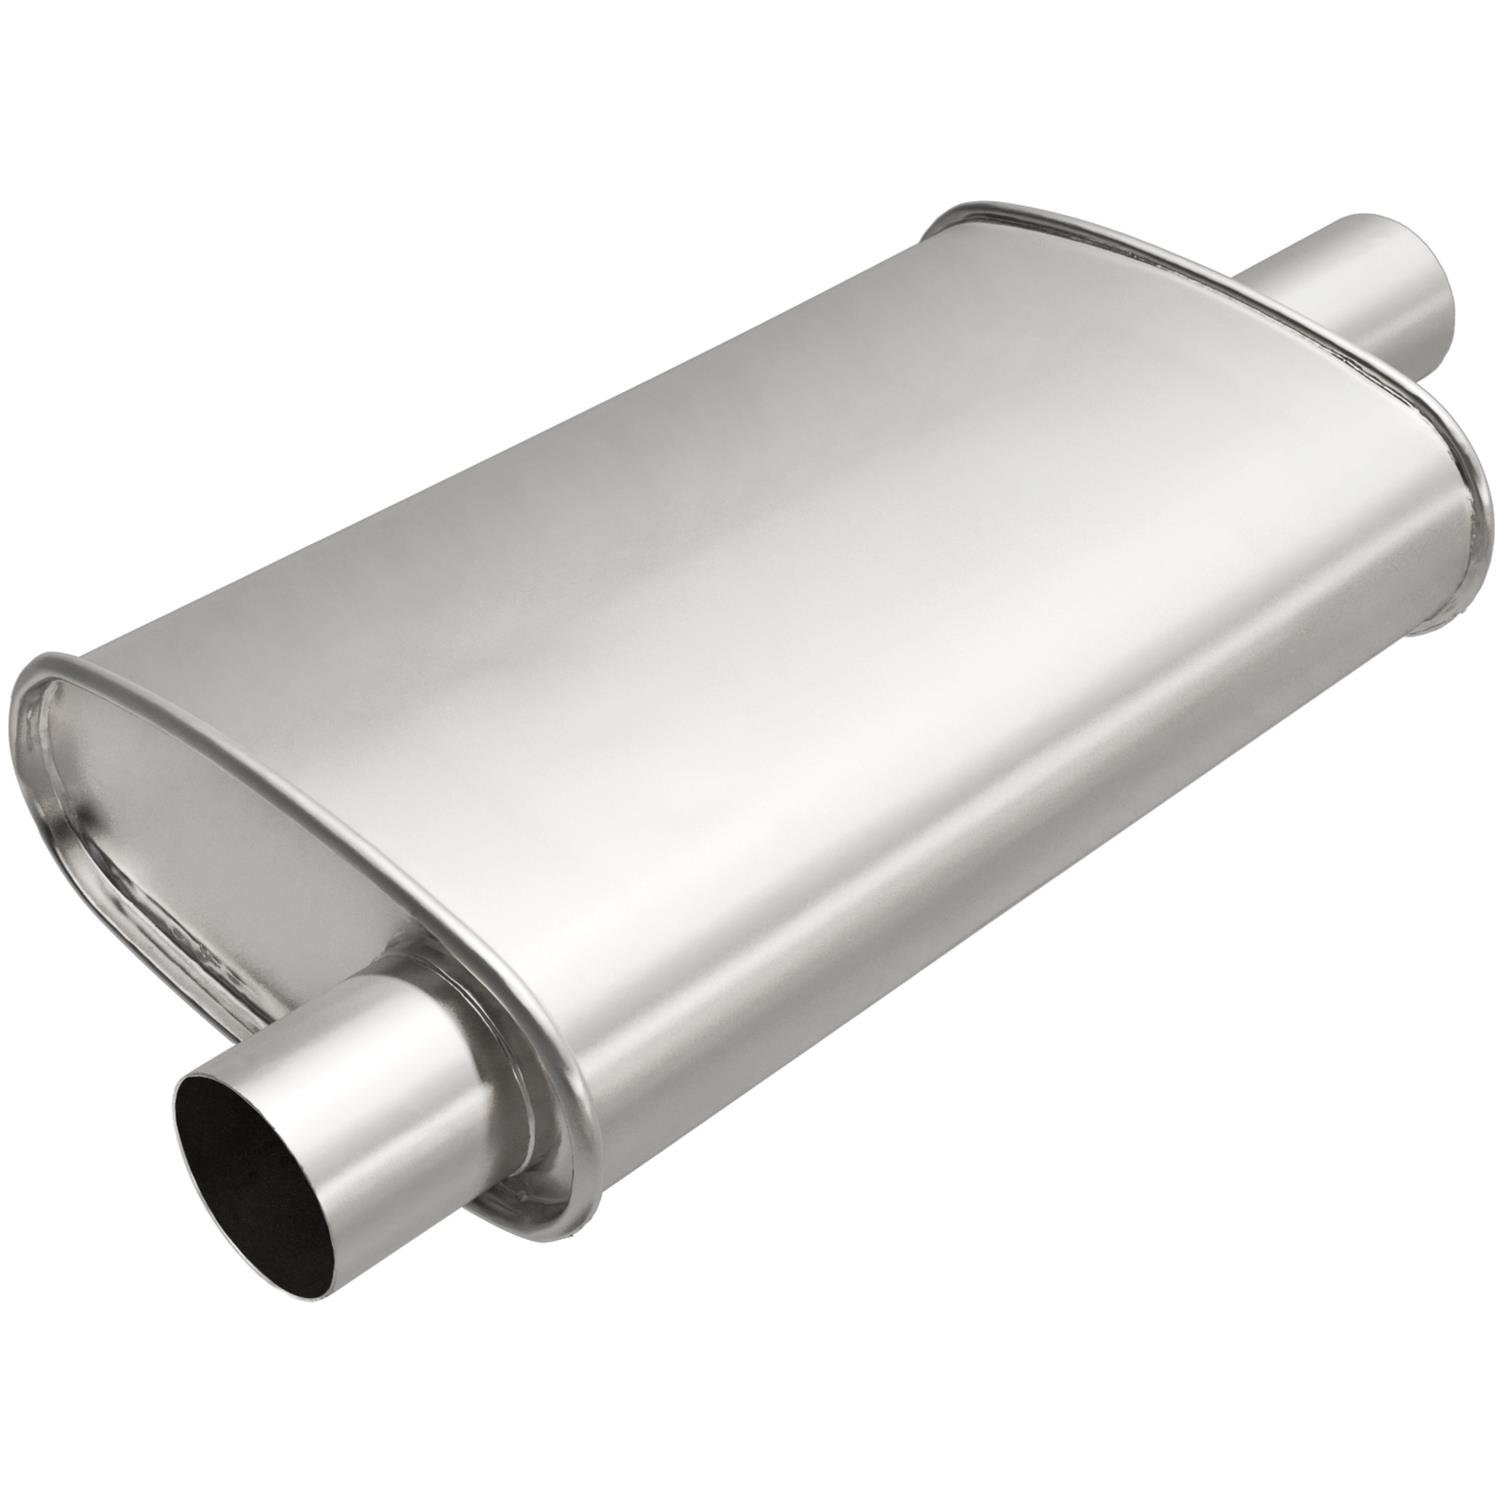 Universal Exhaust Muffler, Oval, Inlet/Outlet: 2.25 in./2 in. , Offset/Center